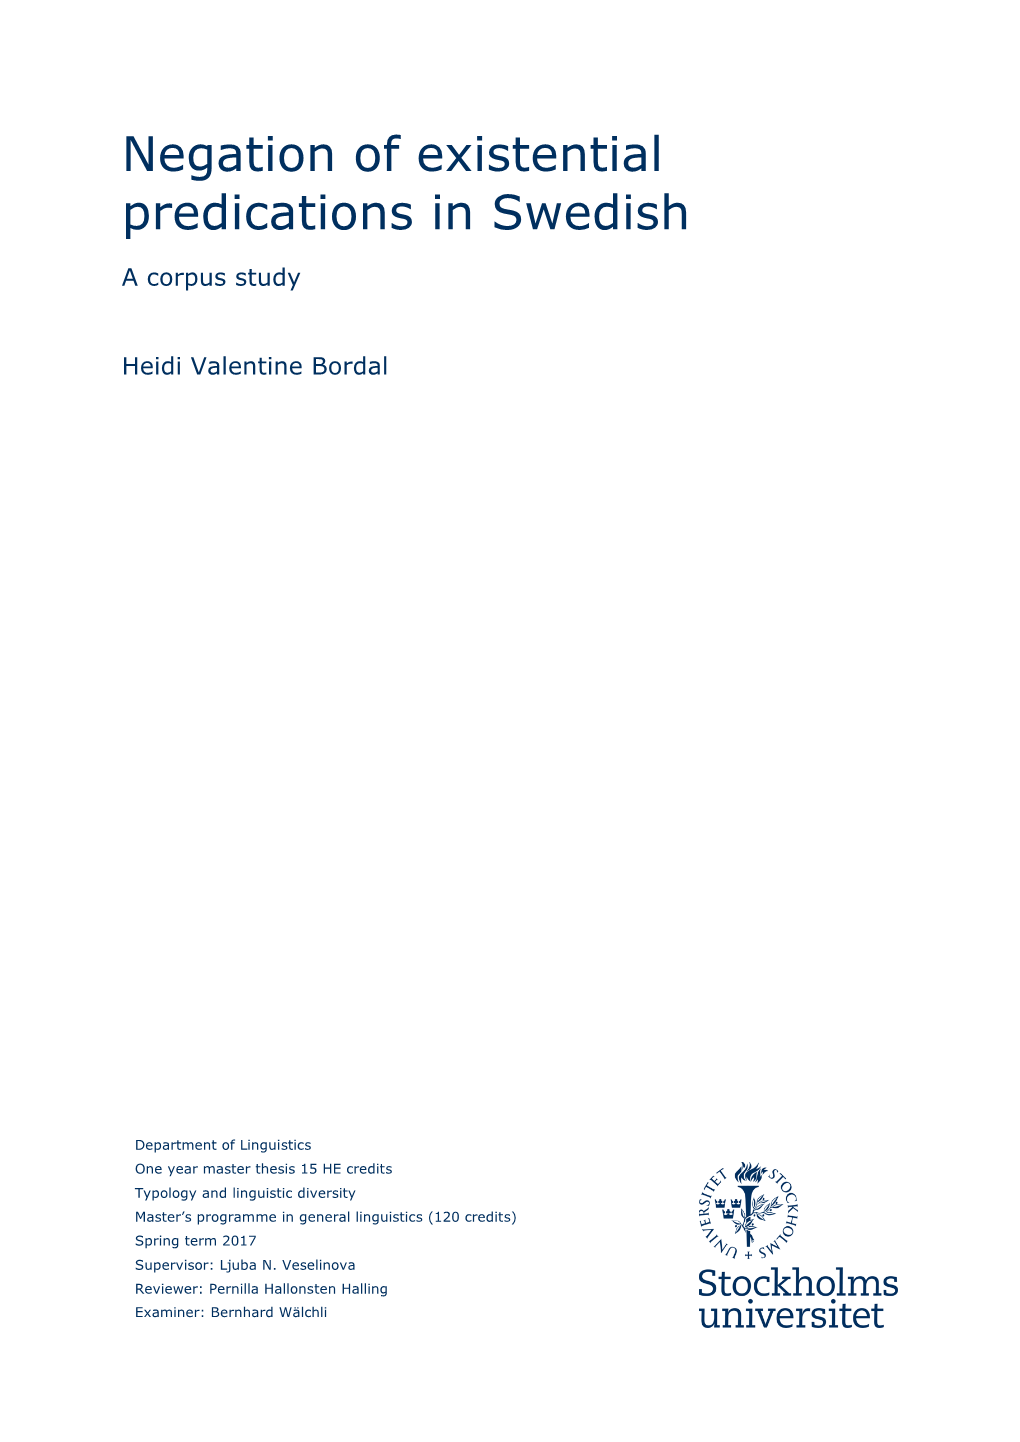 Negation of Existential Predications in Swedish